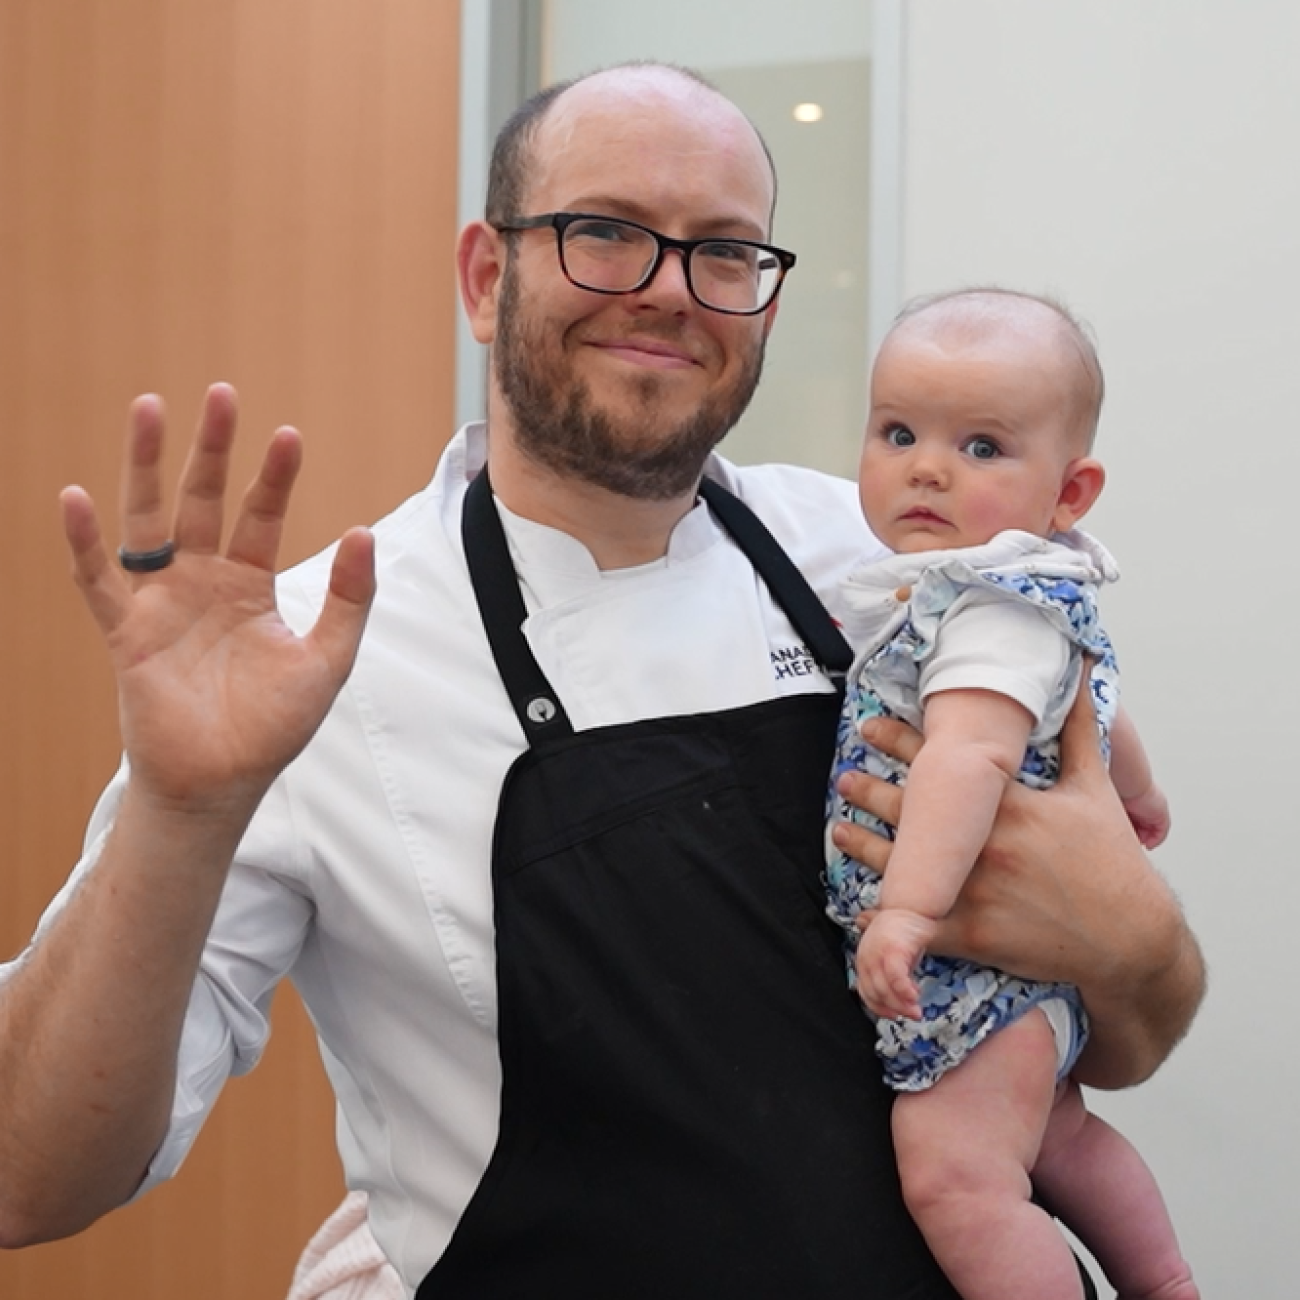 Rich Perks holding his child waving